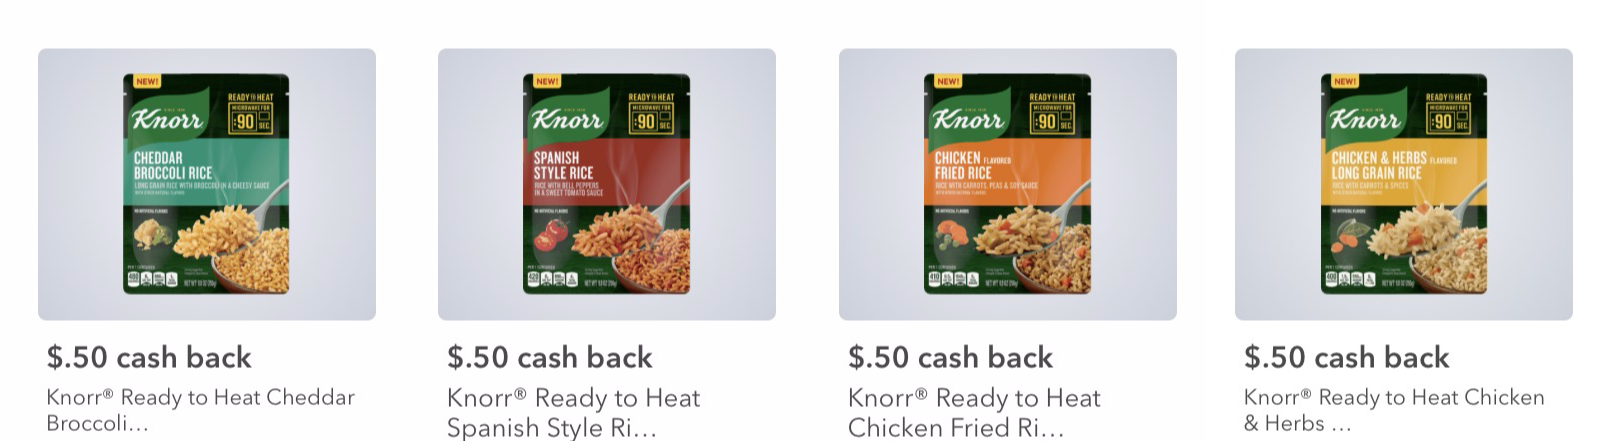 Pick Up Great Deals On Knorr Sides, Knorr Selects and Knorr Ready To Heat Products At Publix on I Heart Publix